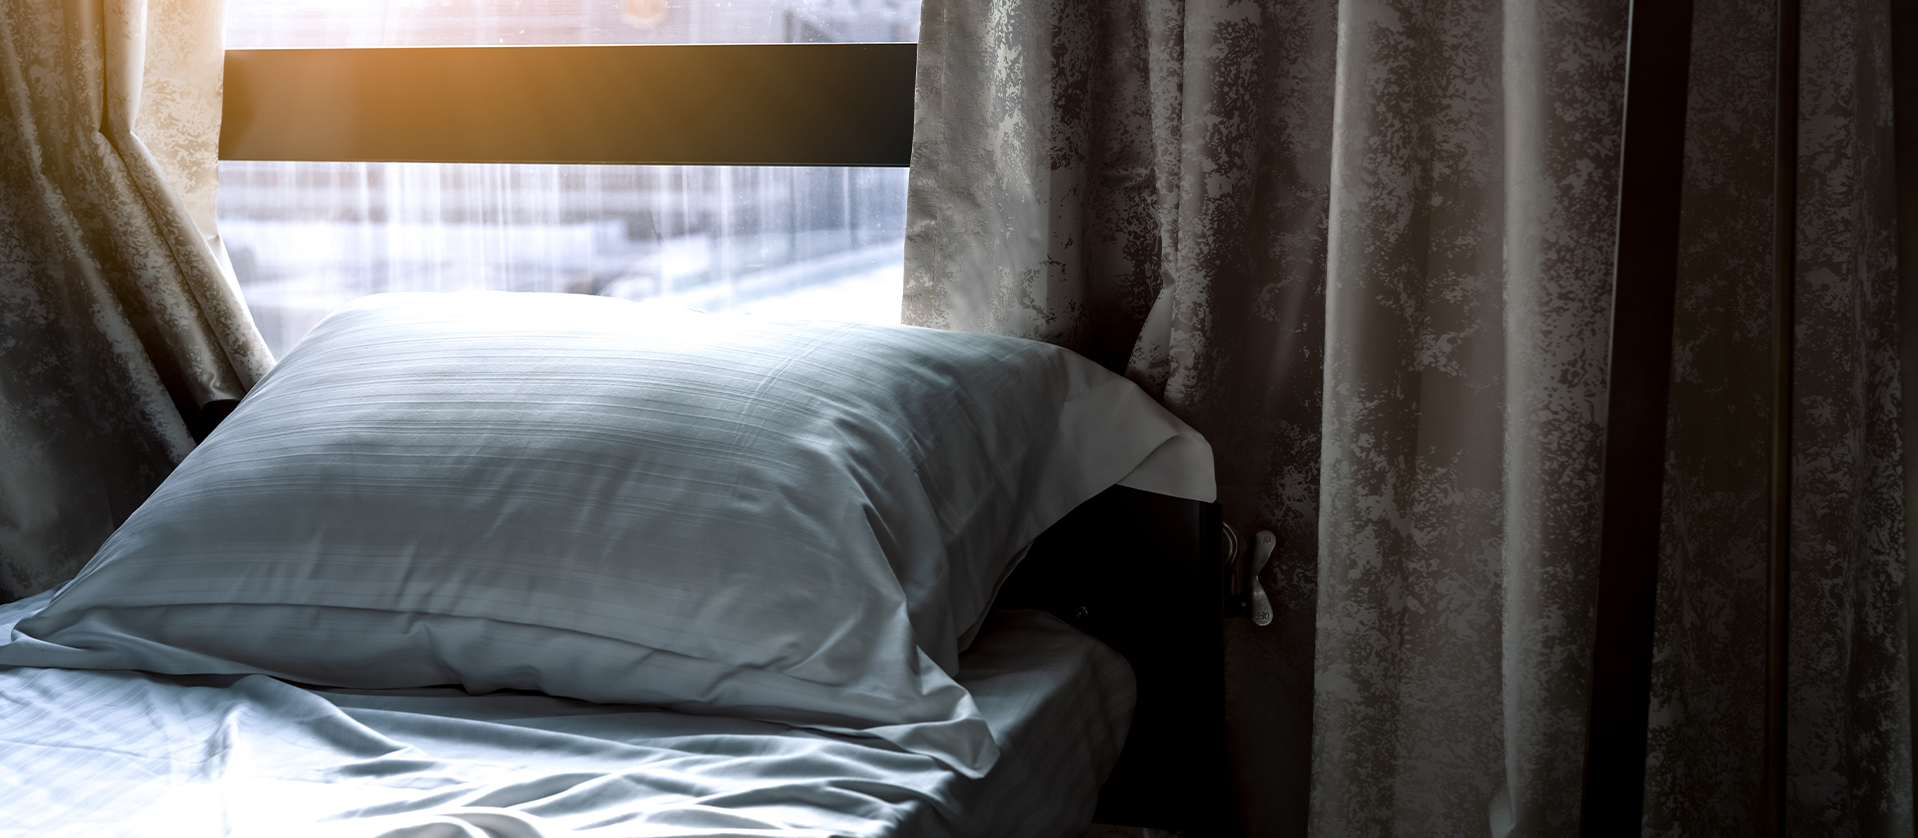 A morning bedroom scene with sunlight filtering through sheer curtains onto a neatly made bed with a fluffy pillow and crisp white sheets.